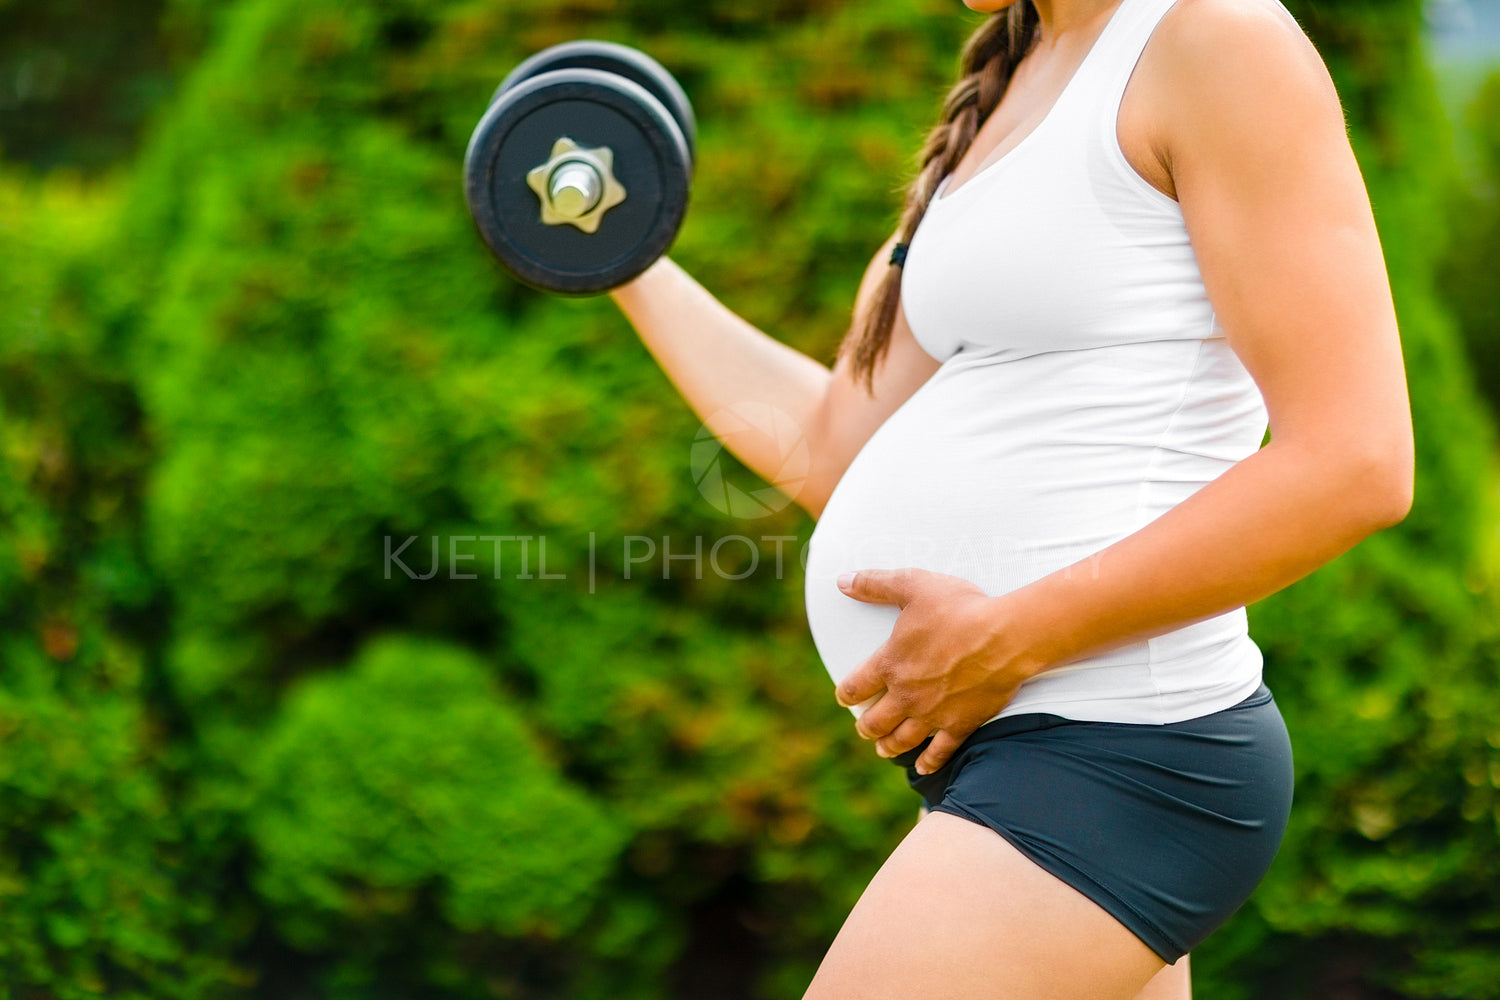 Pregnant Woman Touching Stomach While Exercising With Dumbbell